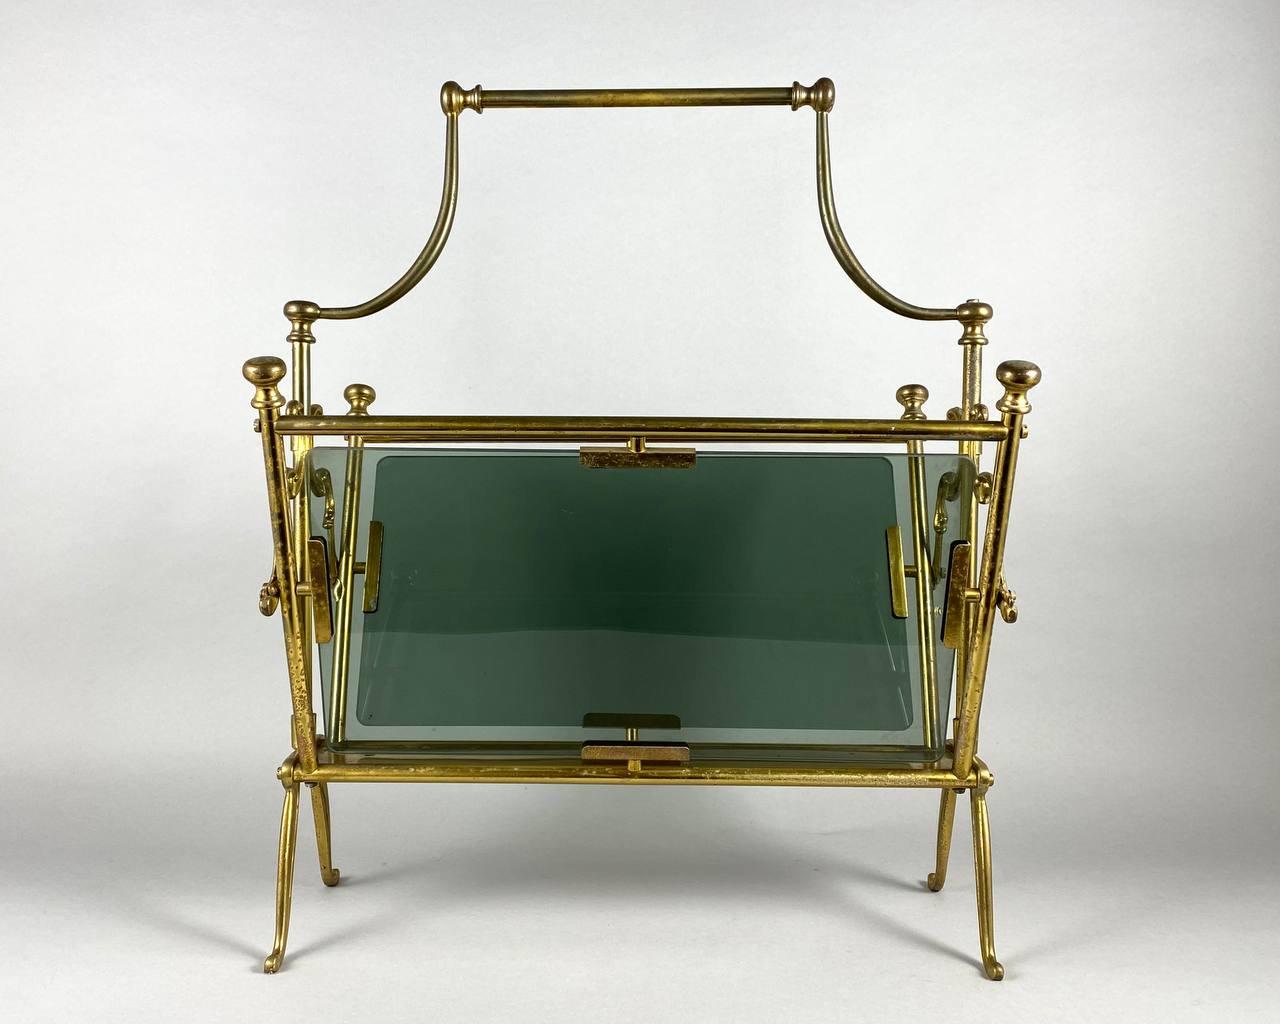 This vintage magazine rack features a classic French style brass frame with two smoked glass surfaces by Maison Bagues.

A practical magazine/newspaper rack from the 20th century.

The magazine rack takes up little space, and its size allows you to